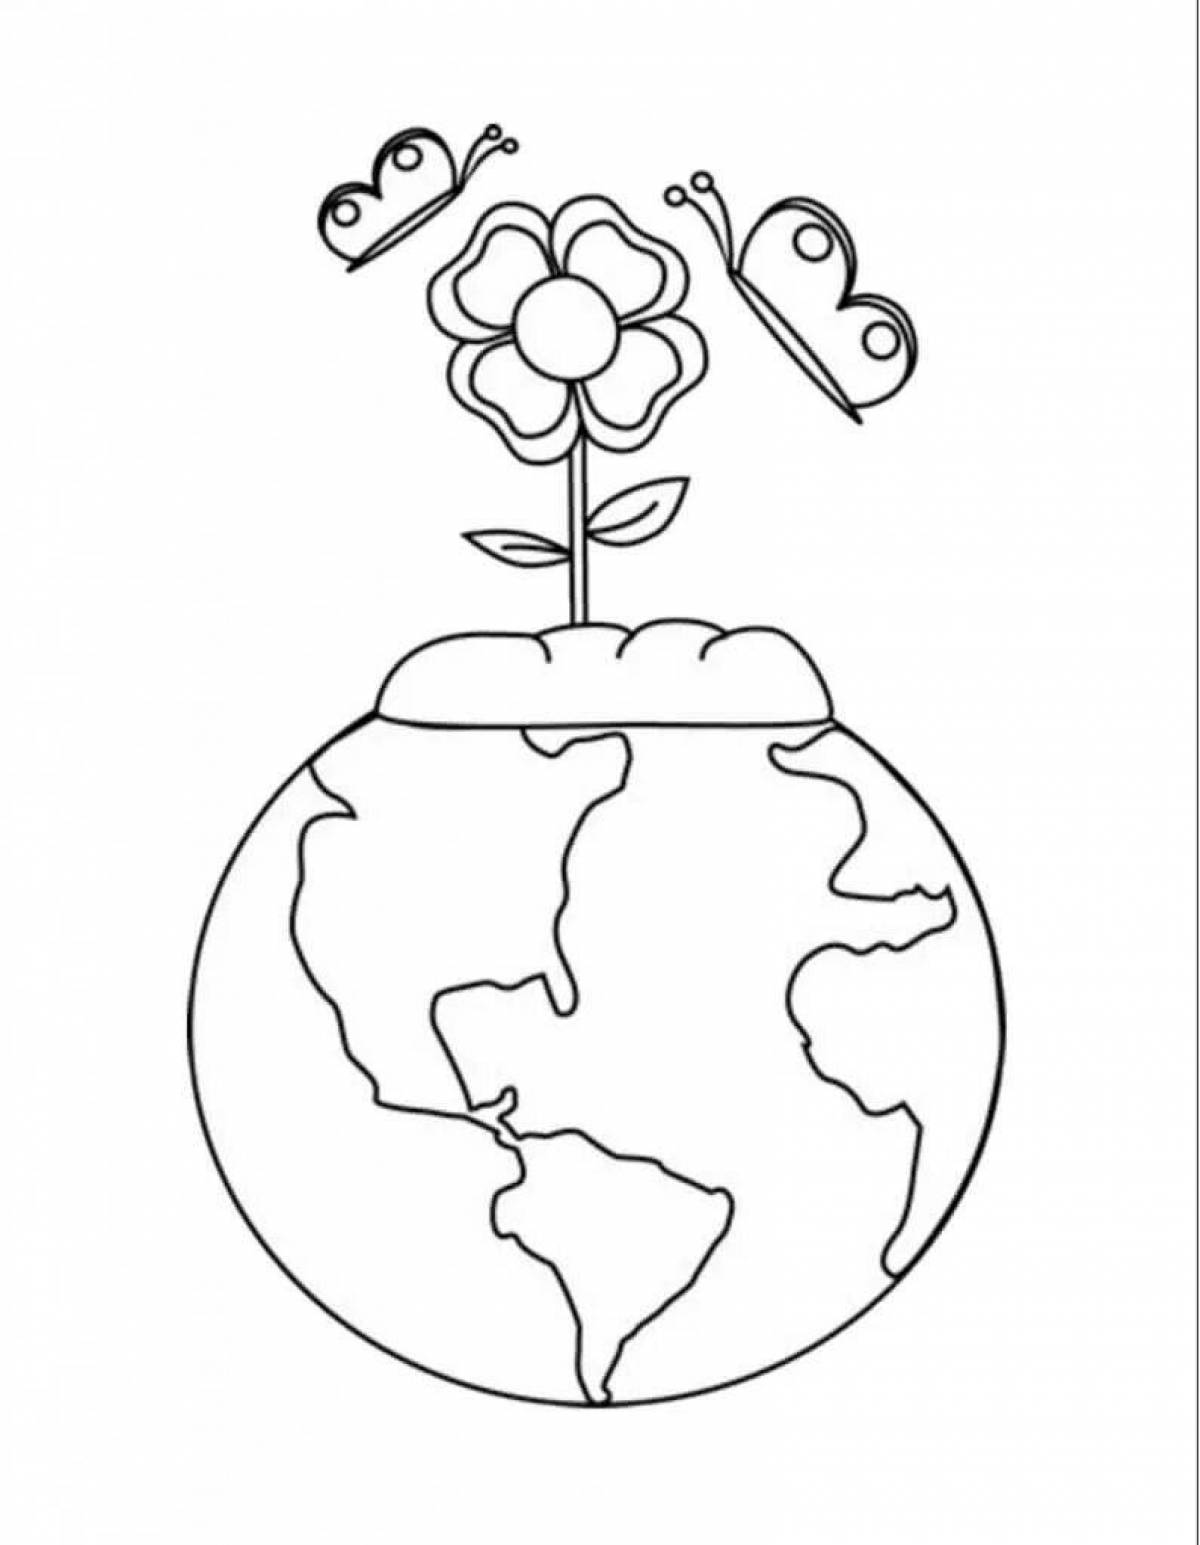 Save nature fun coloring page